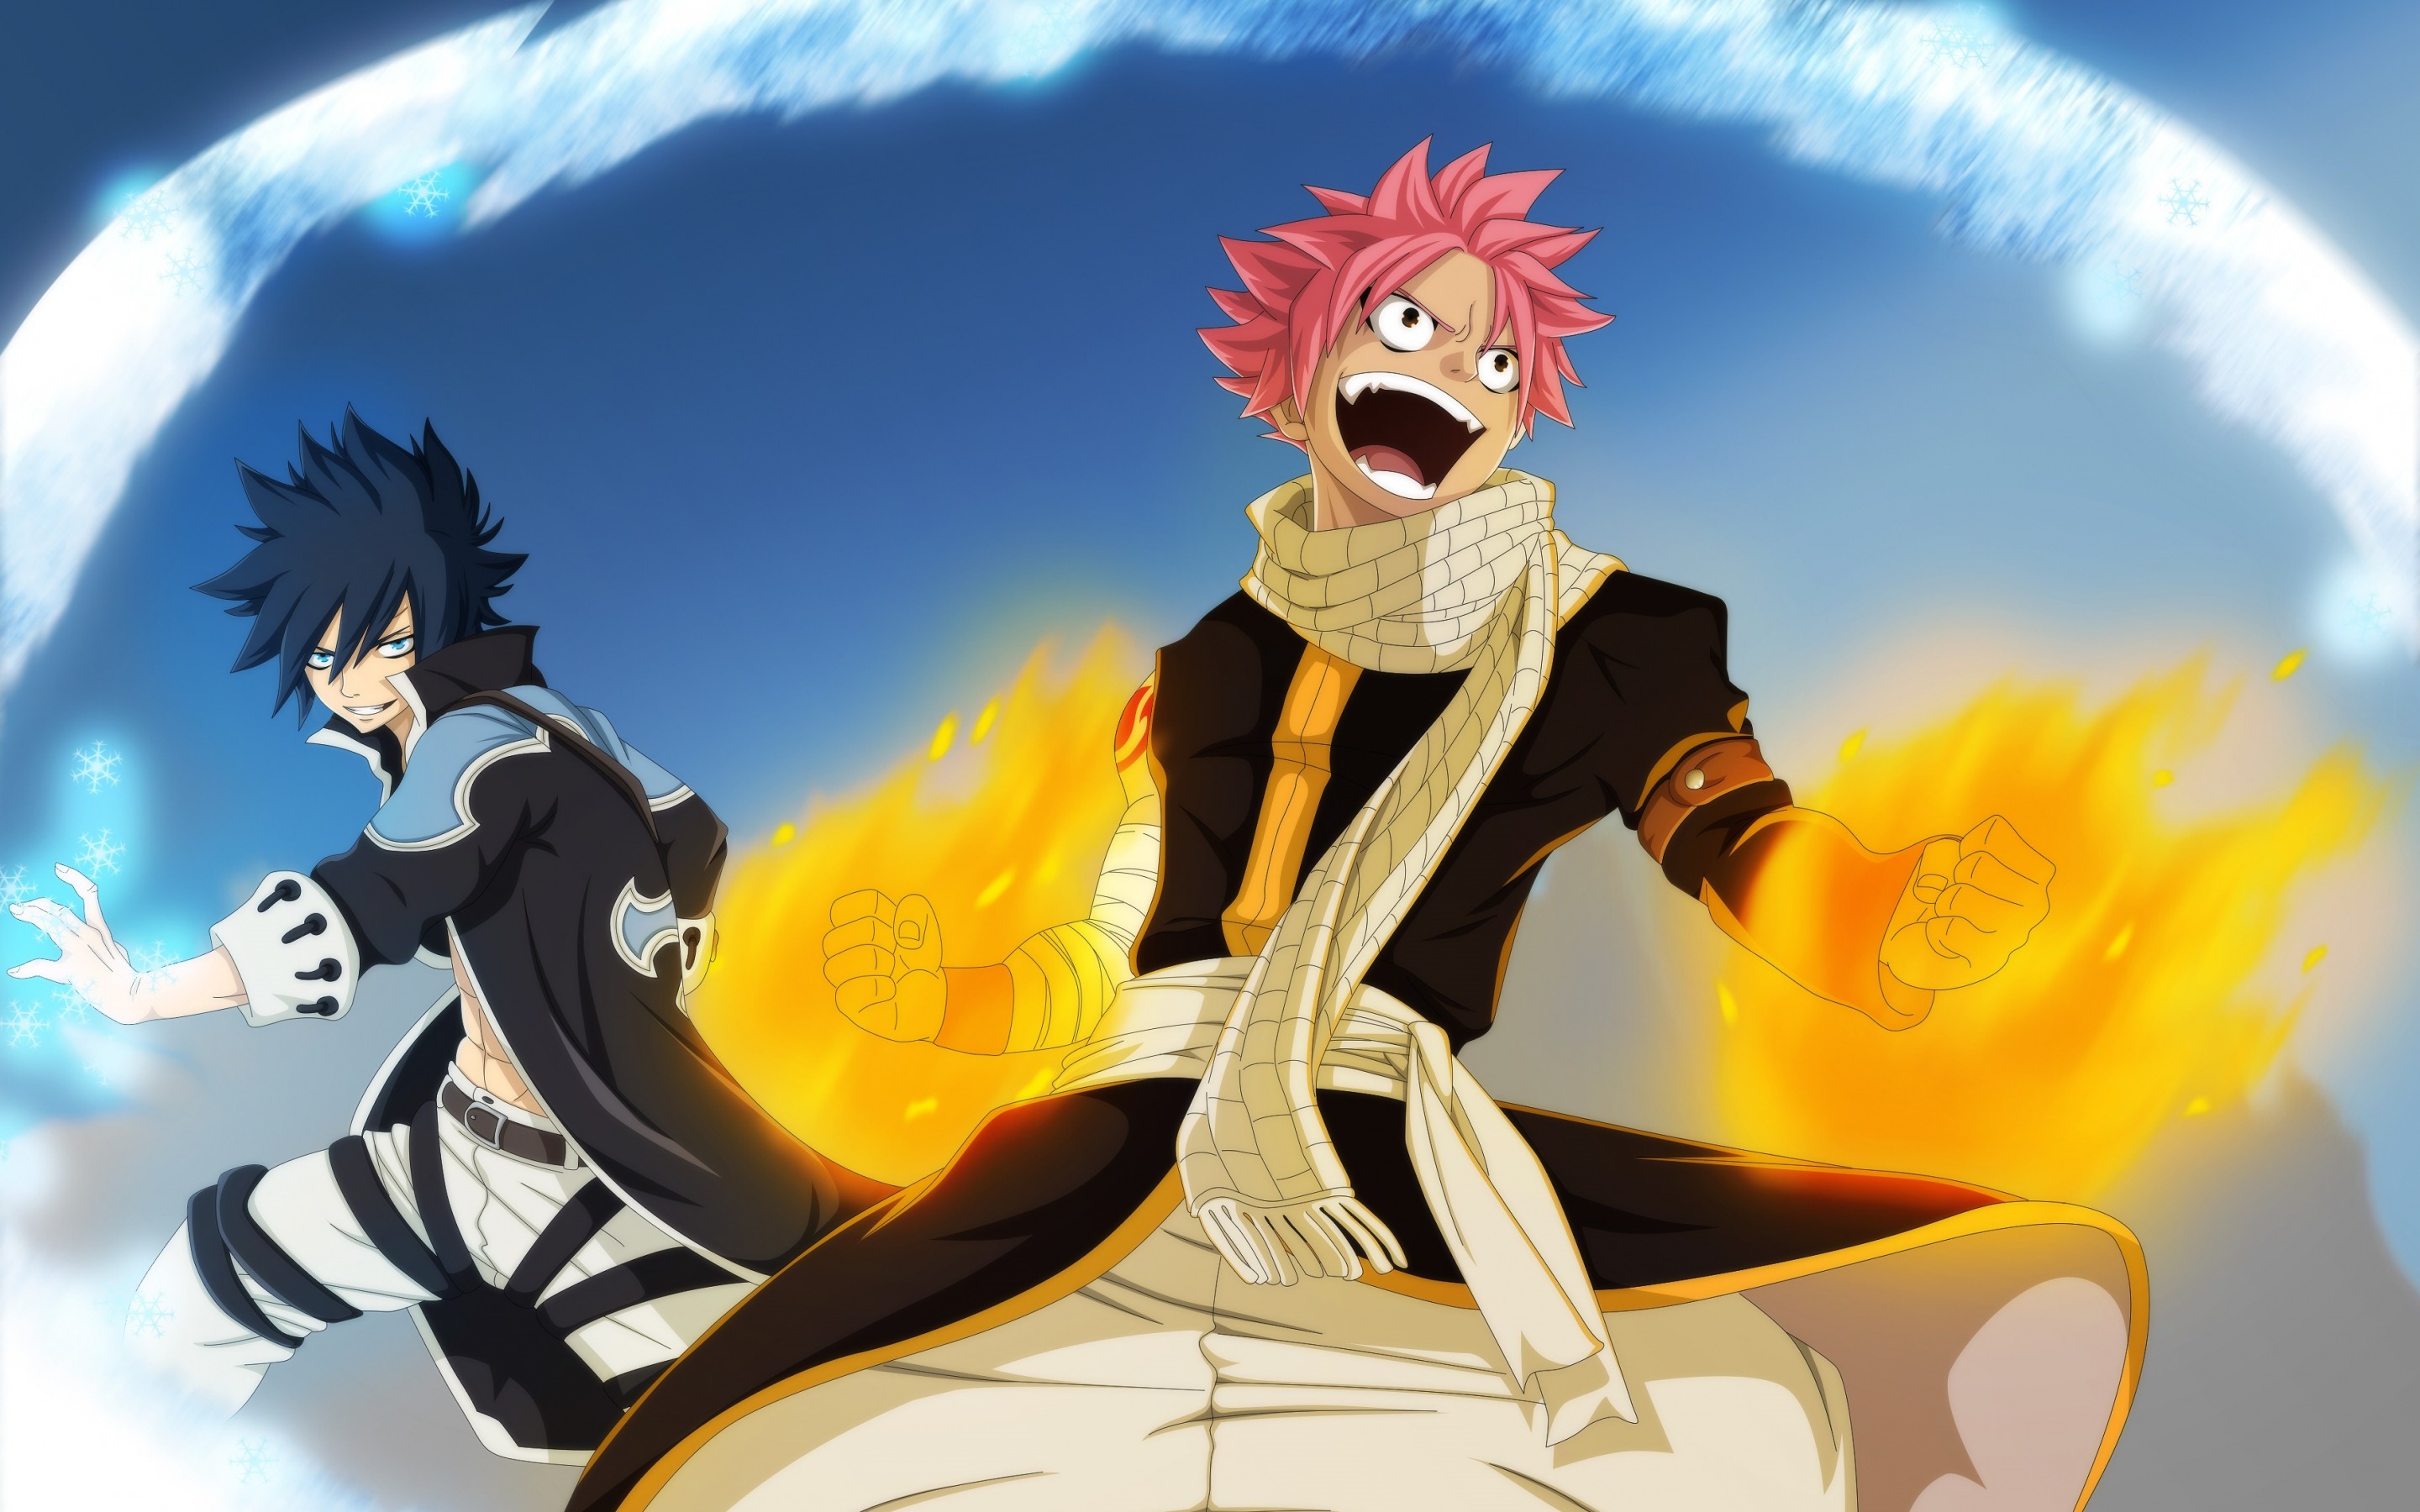 Which Anime Character is More Destructive Meliodas 7 Deadly Sins vs  Natsu Fairy Tail  Anime  Fanpop